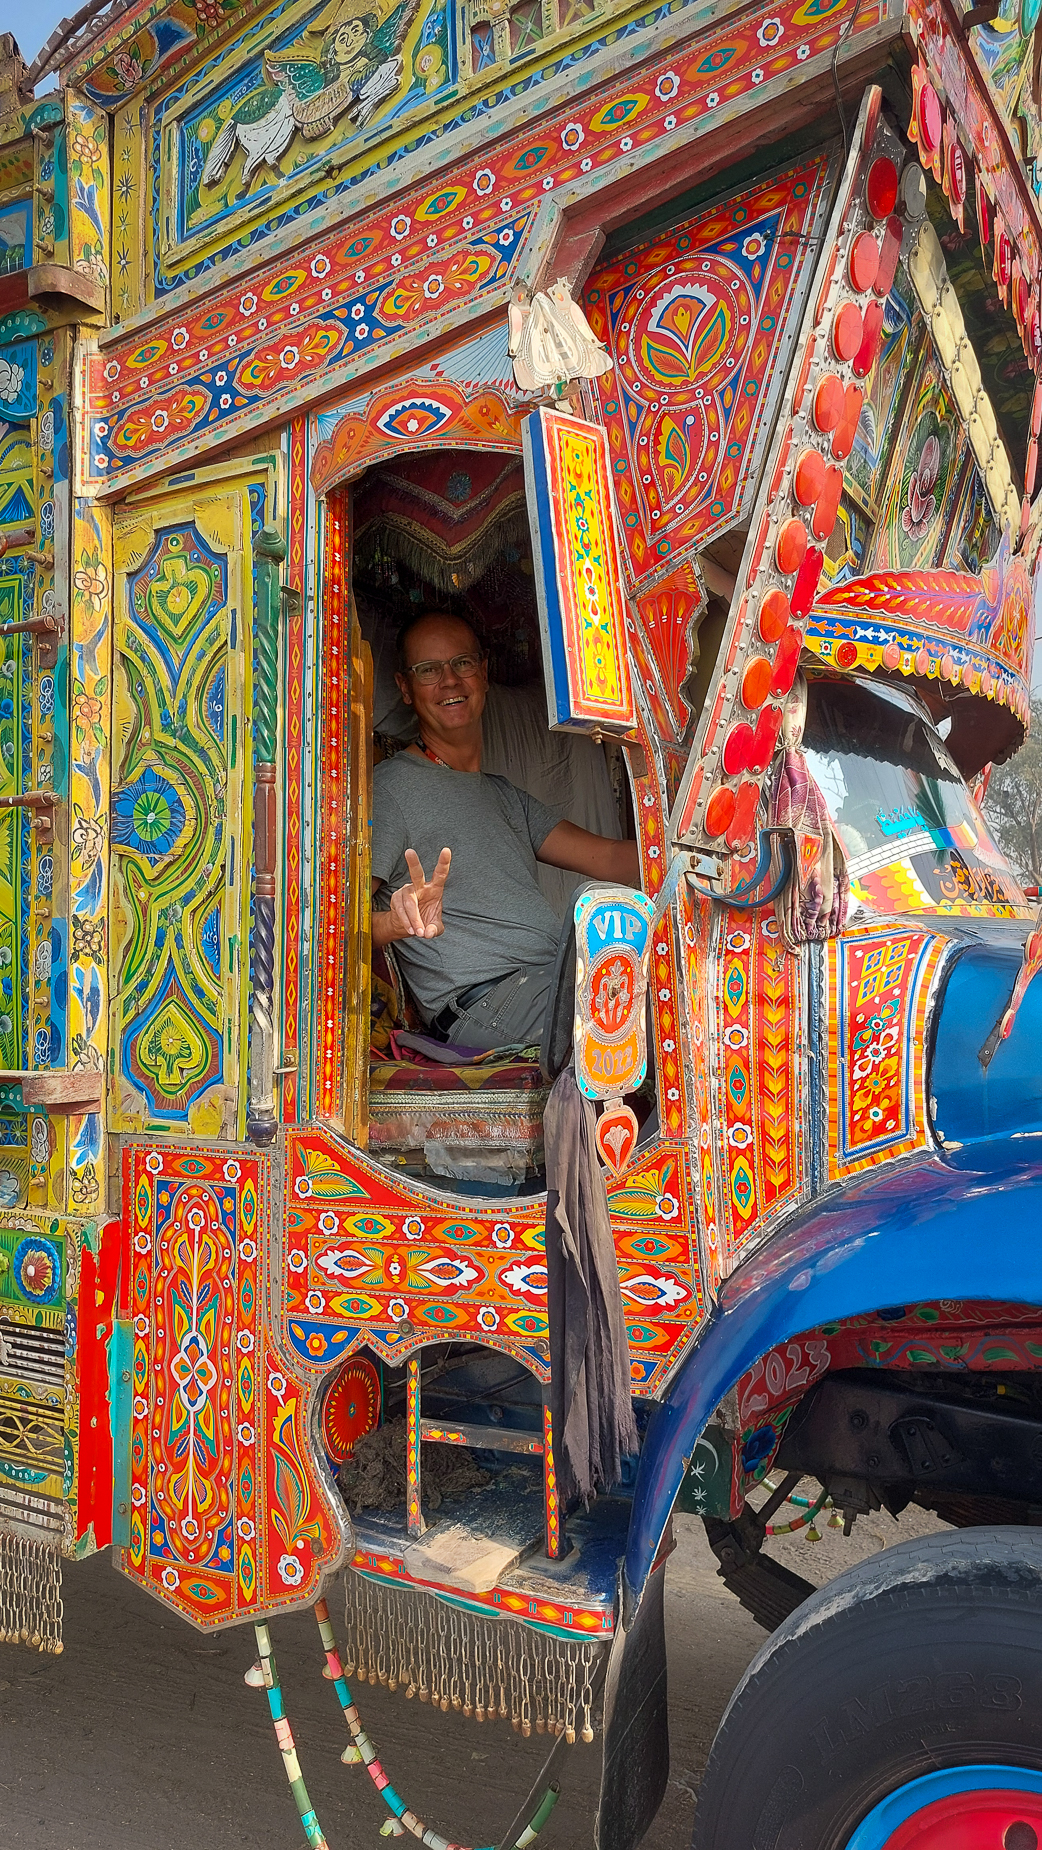 <span  class="uc_style_uc_tiles_grid_image_elementor_uc_items_attribute_title" style="color:#ffffff;">Carsten could not stand it: he must try one of those Pakistanian trucks</span>